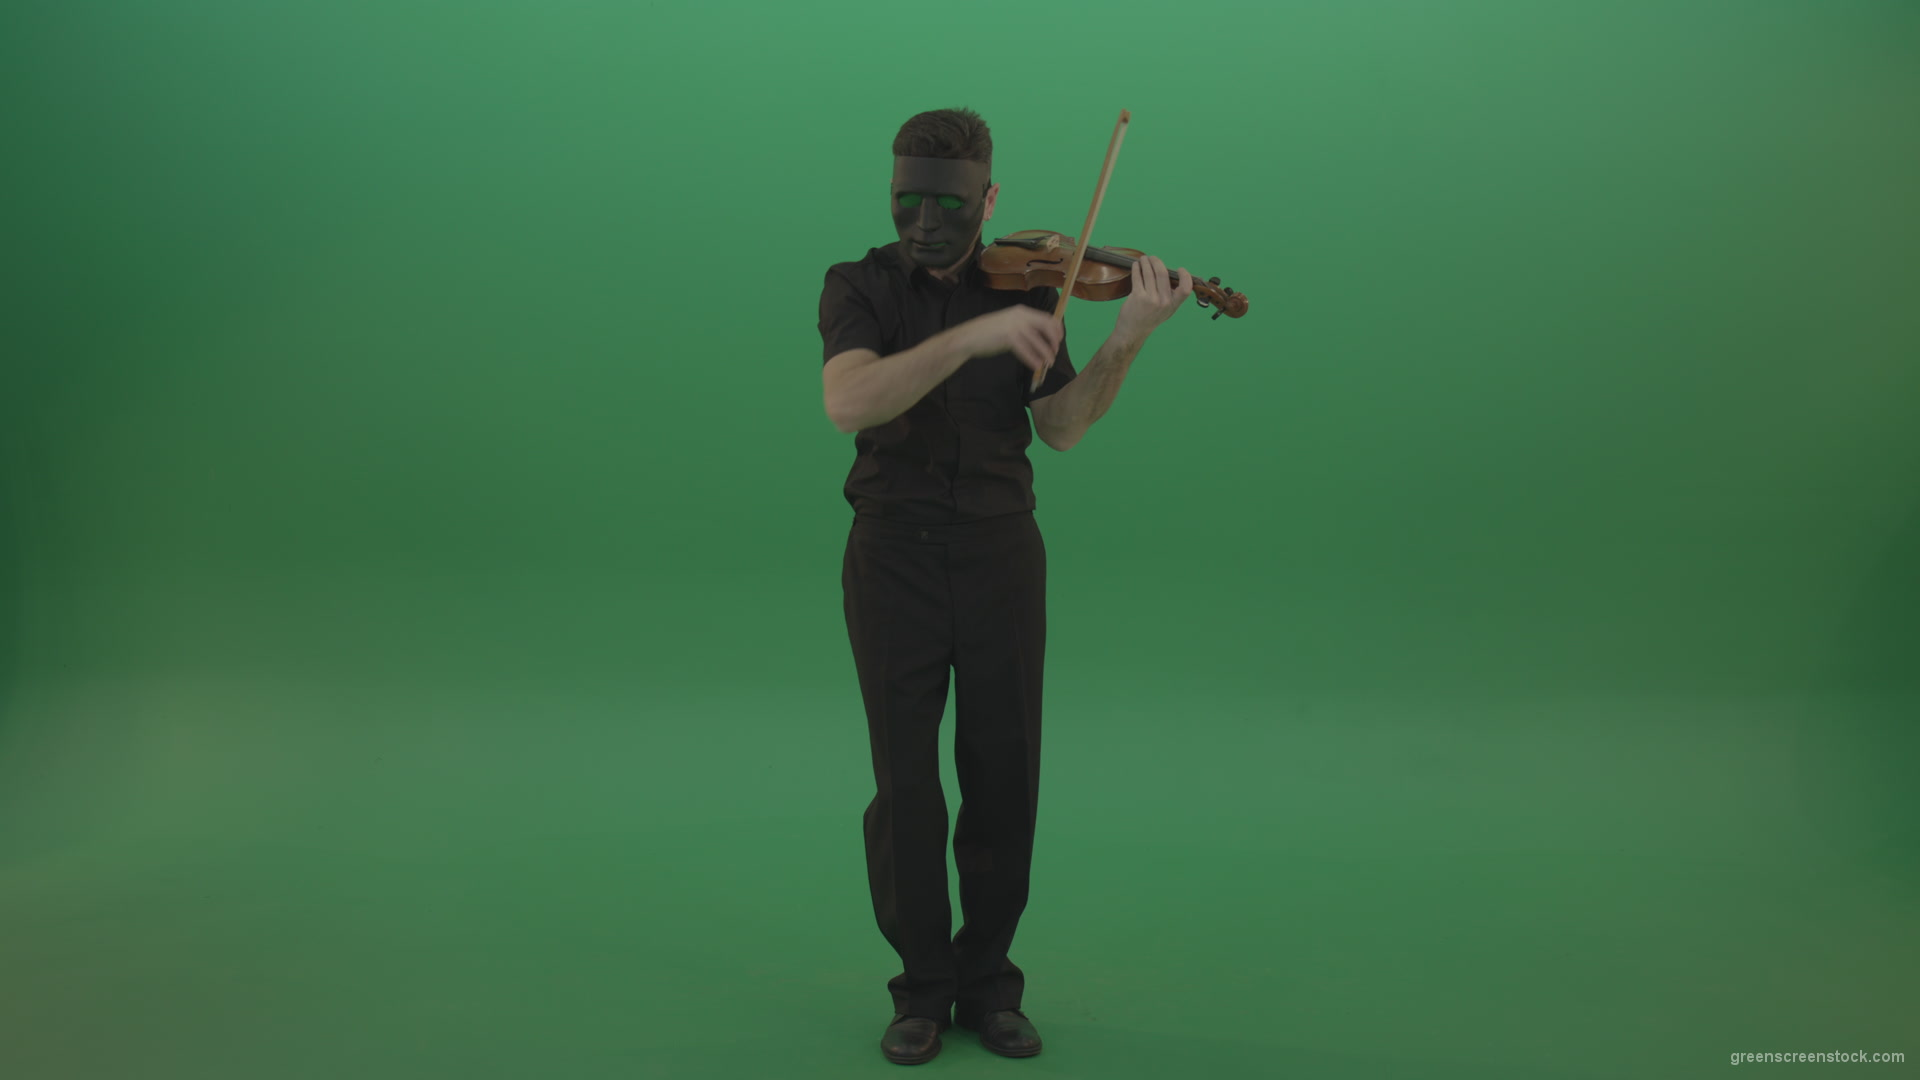 Full-height-Rock-Man-in-black-wear-and-mask-play-violin-fiddle-strings-gothic-dark-music-isolated-on-green-screen_005 Green Screen Stock